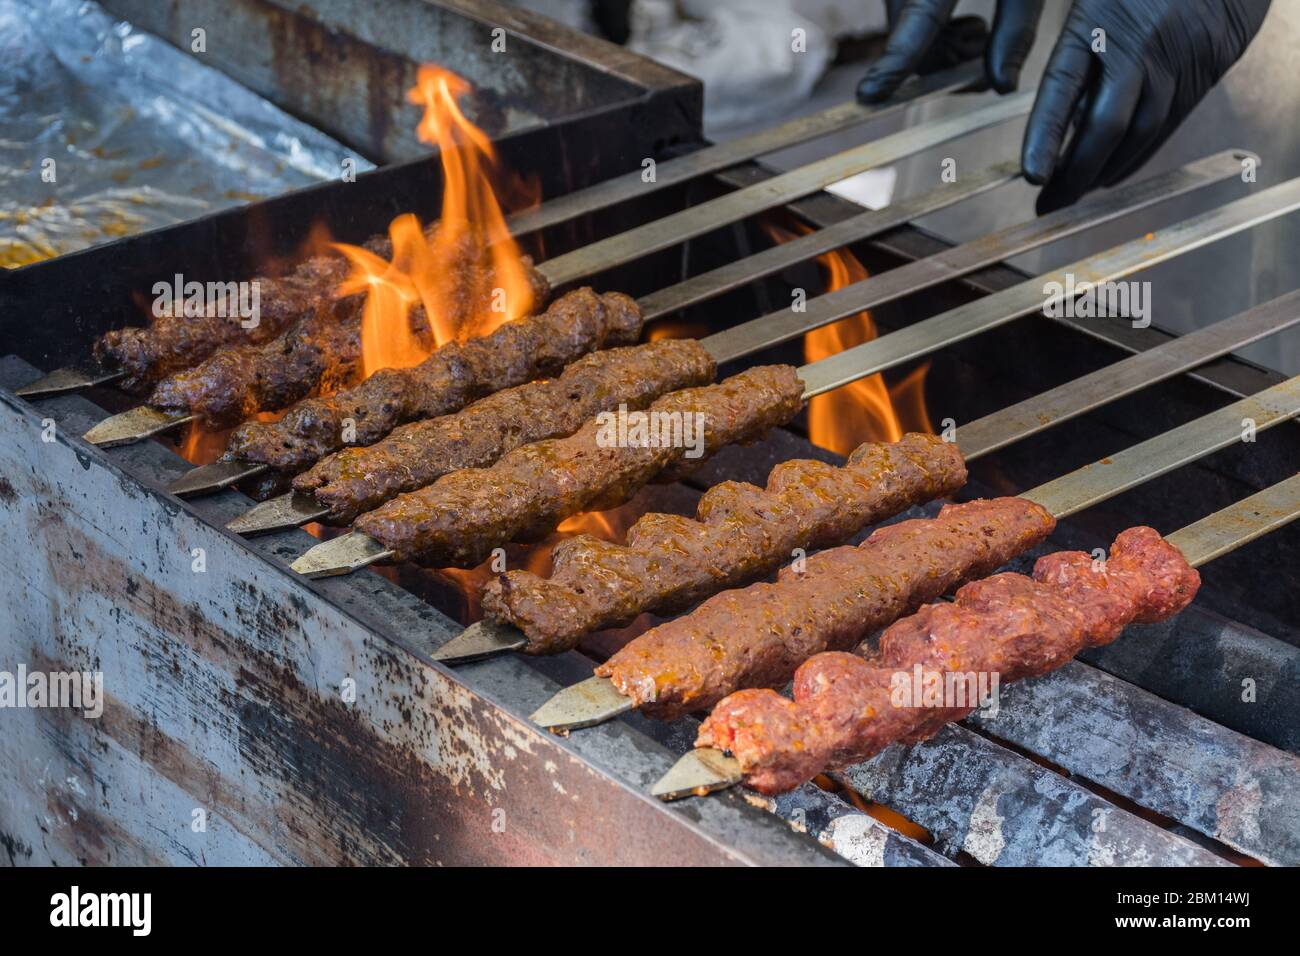 Adana kebab (ground lamb minced meat on skewer on grill over charcoal).Chef  preparing traditional authentic Turkish shaworma. Middle eastern cuisine  Stock Photo - Alamy